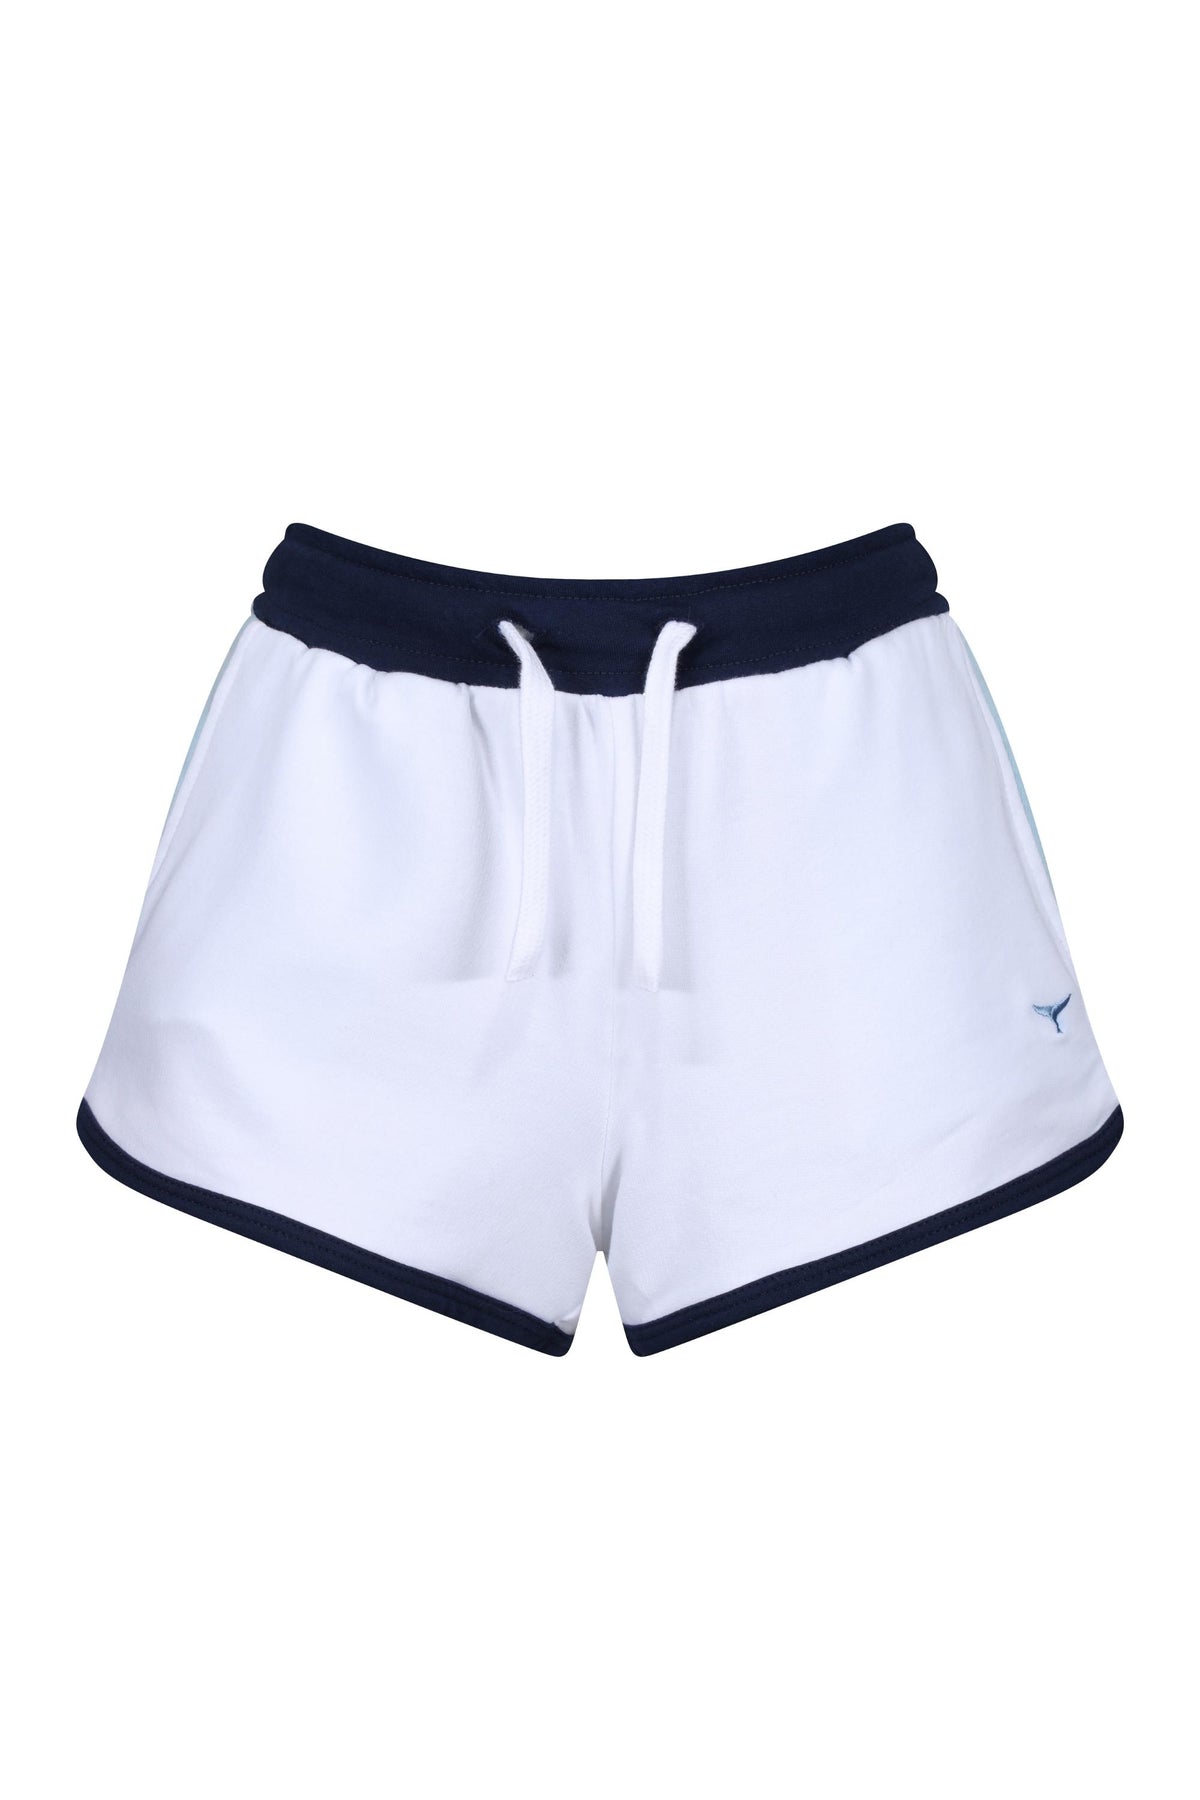 St Ives Shorts - White - Whale Of A Time Clothing